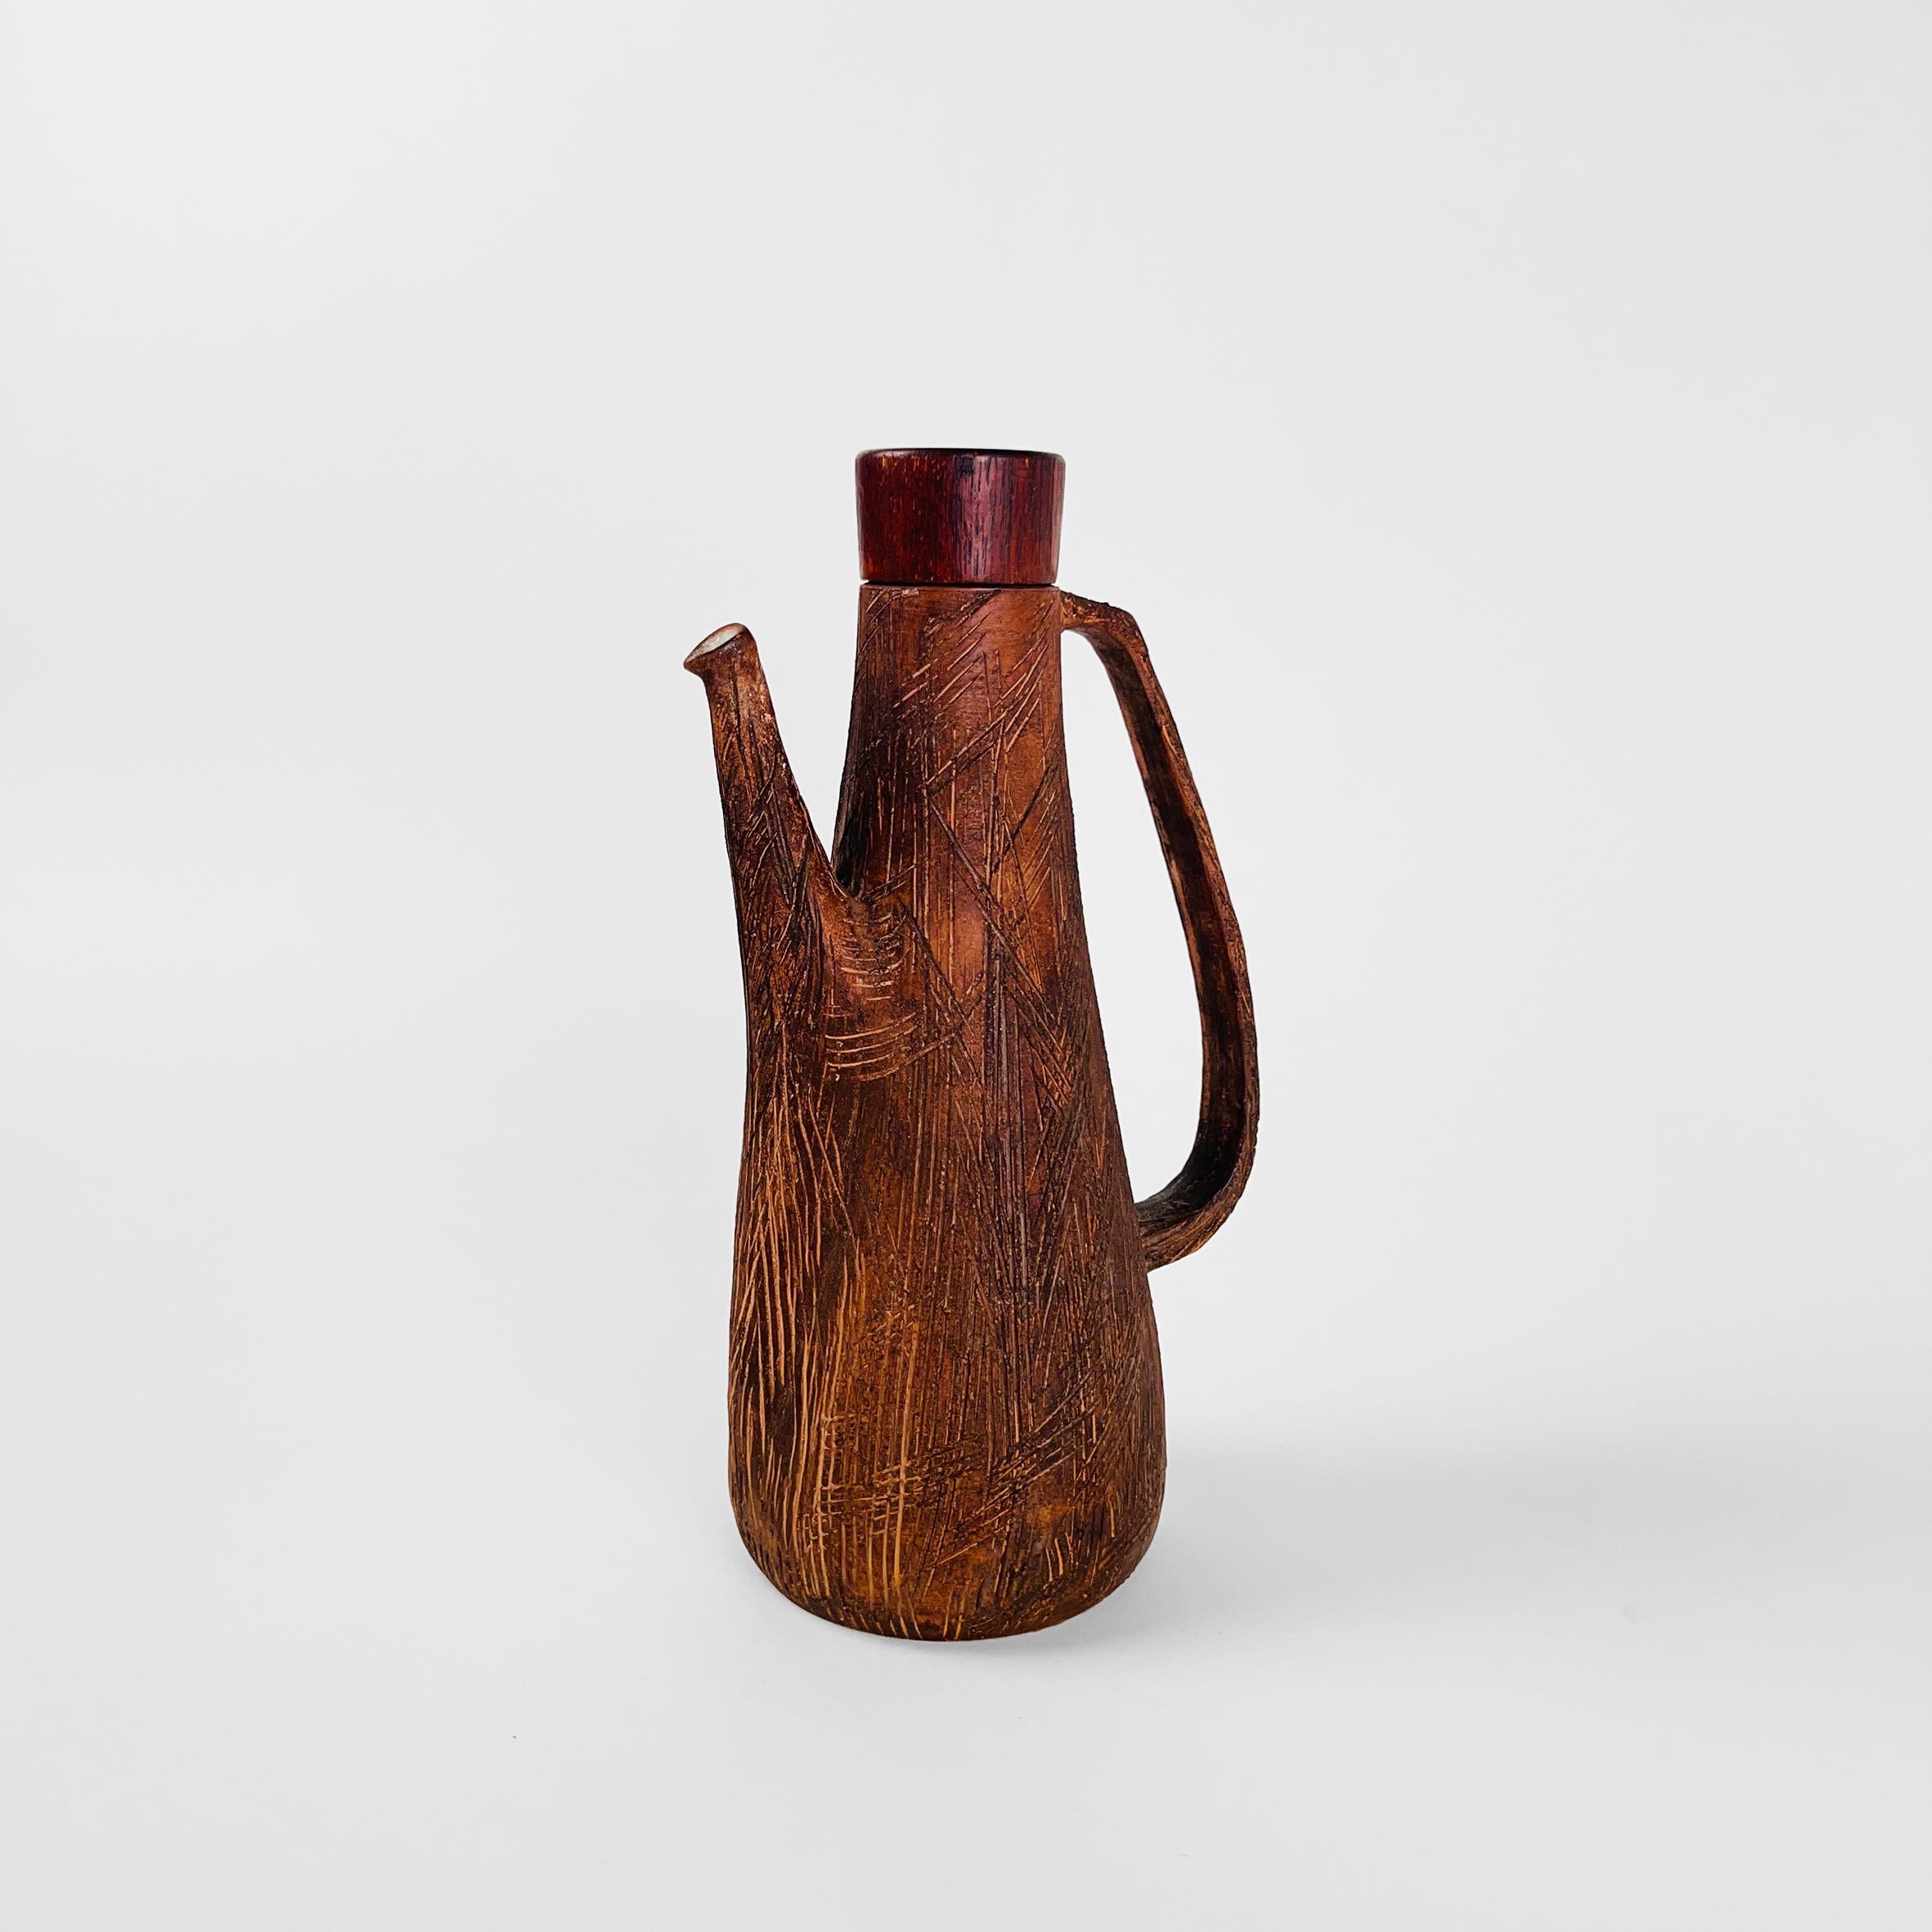 Rustic Japanese pitcher with wooden lid. Exterior finished in mate dark brown glaze with combed texture. Interior finished in white gloss glaze.